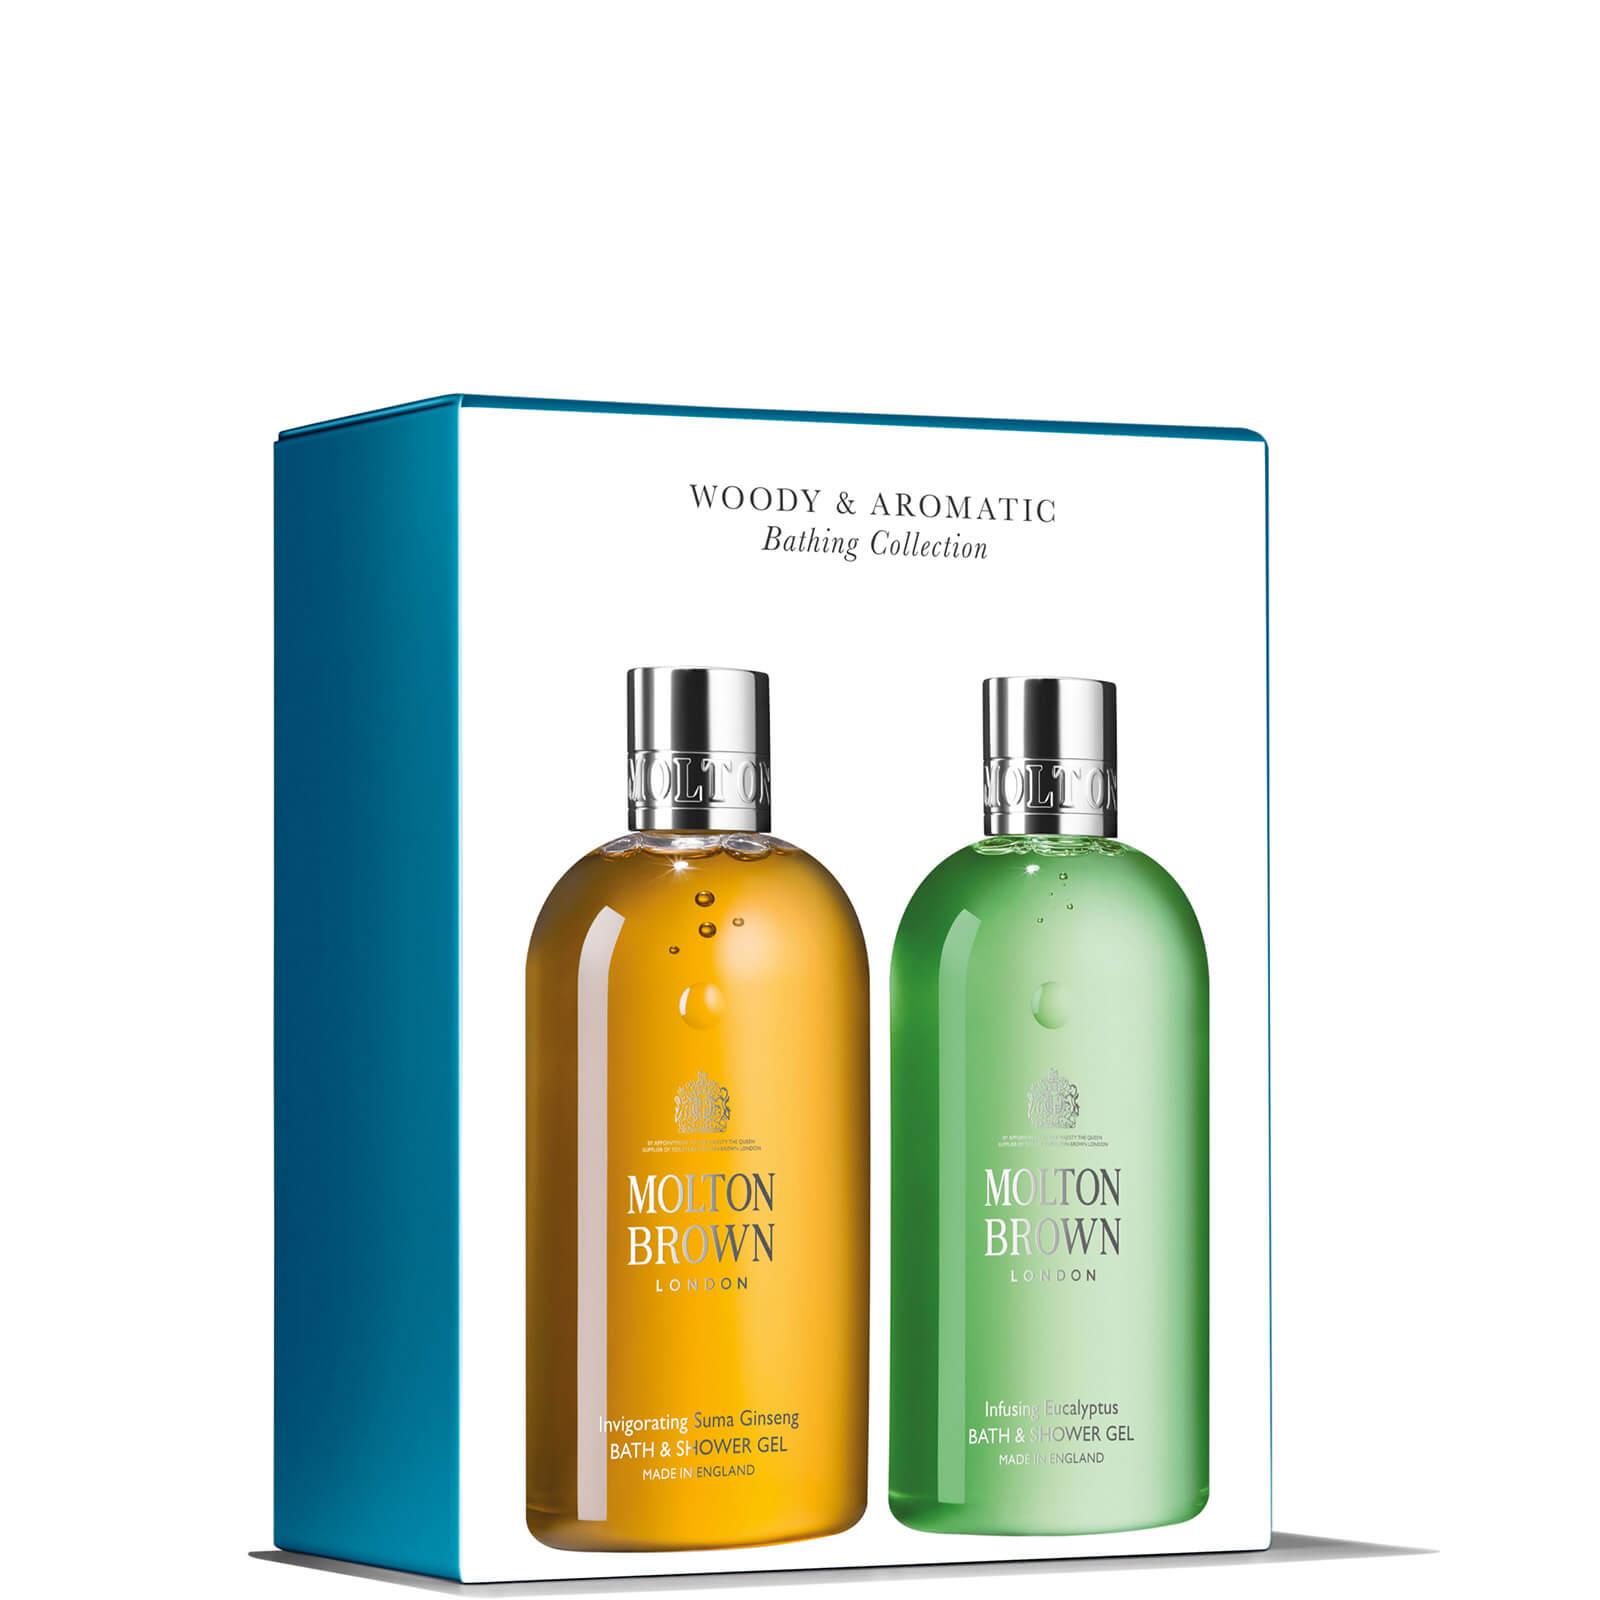 Molton Brown Woody and Aromatic Bathing Collection (Worth £44.00)